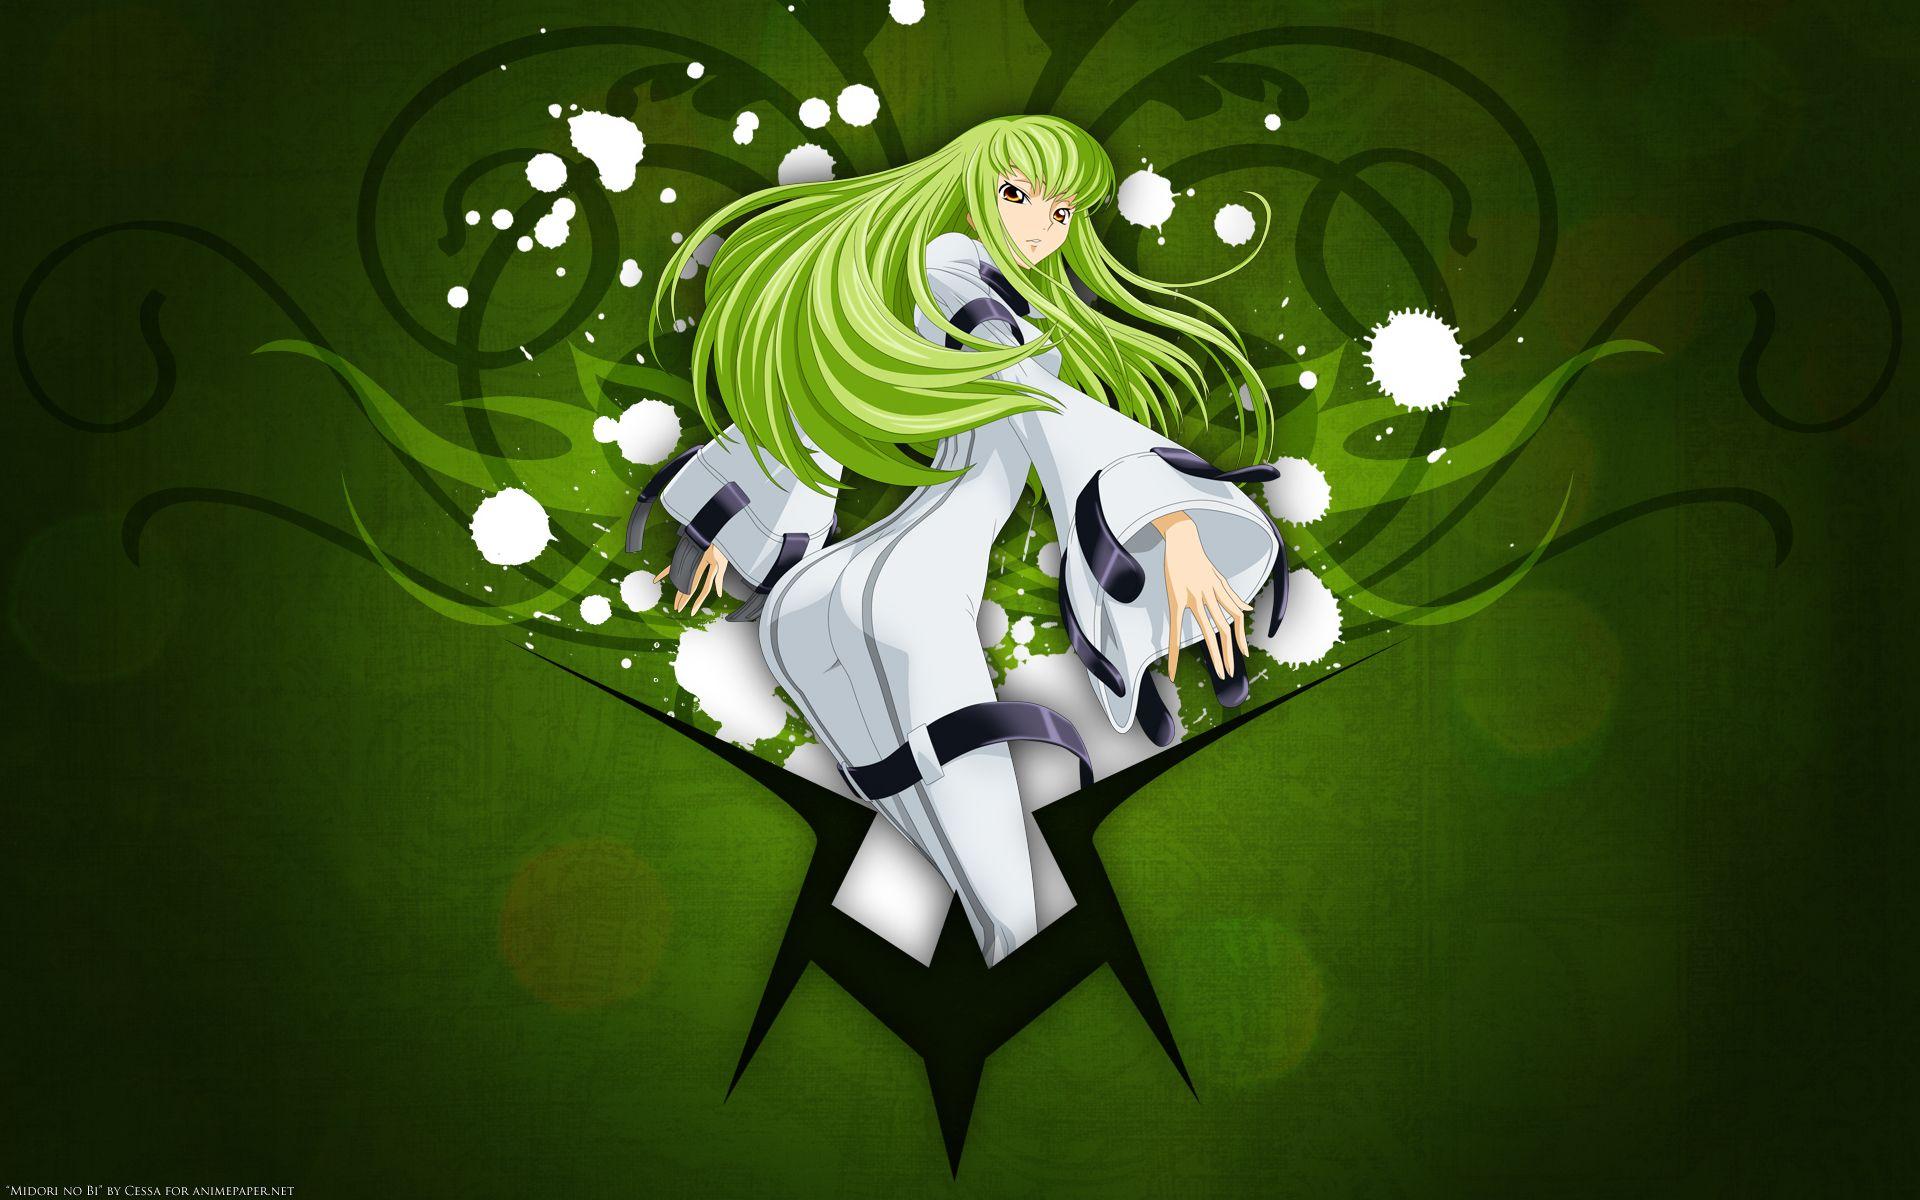 Anime Green Wallpapers - Top Free Anime Green Backgrounds - WallpaperAccess  | Black rock shooter, Hd anime wallpapers, Anime wallpaper